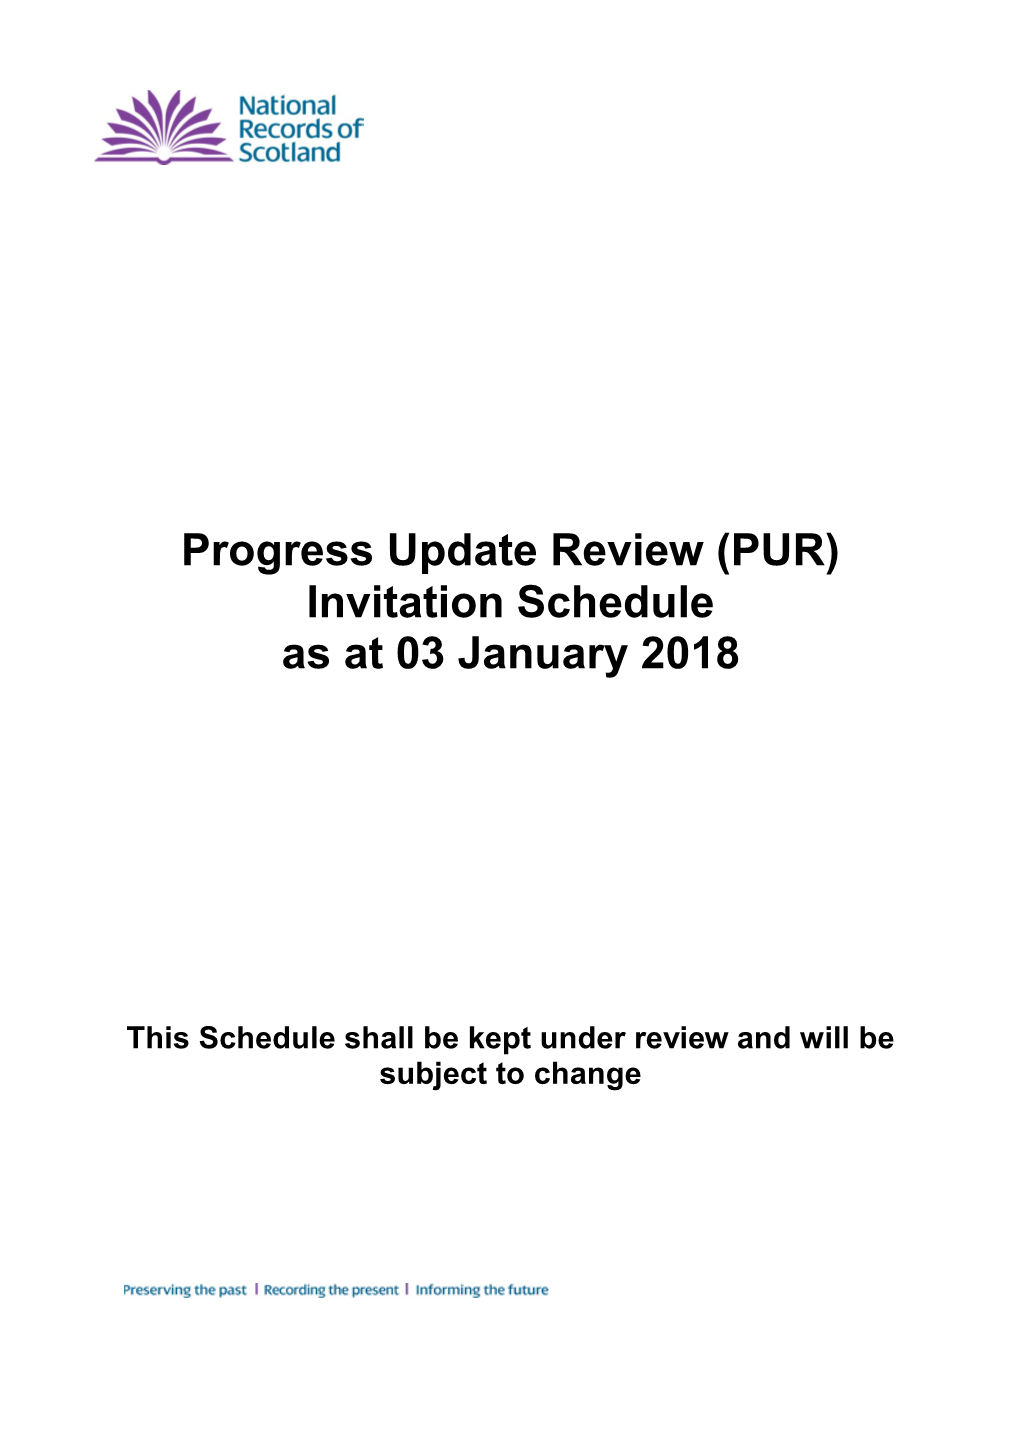 Progress Update Review (PUR) Invitation Schedule As at 03 January 2018